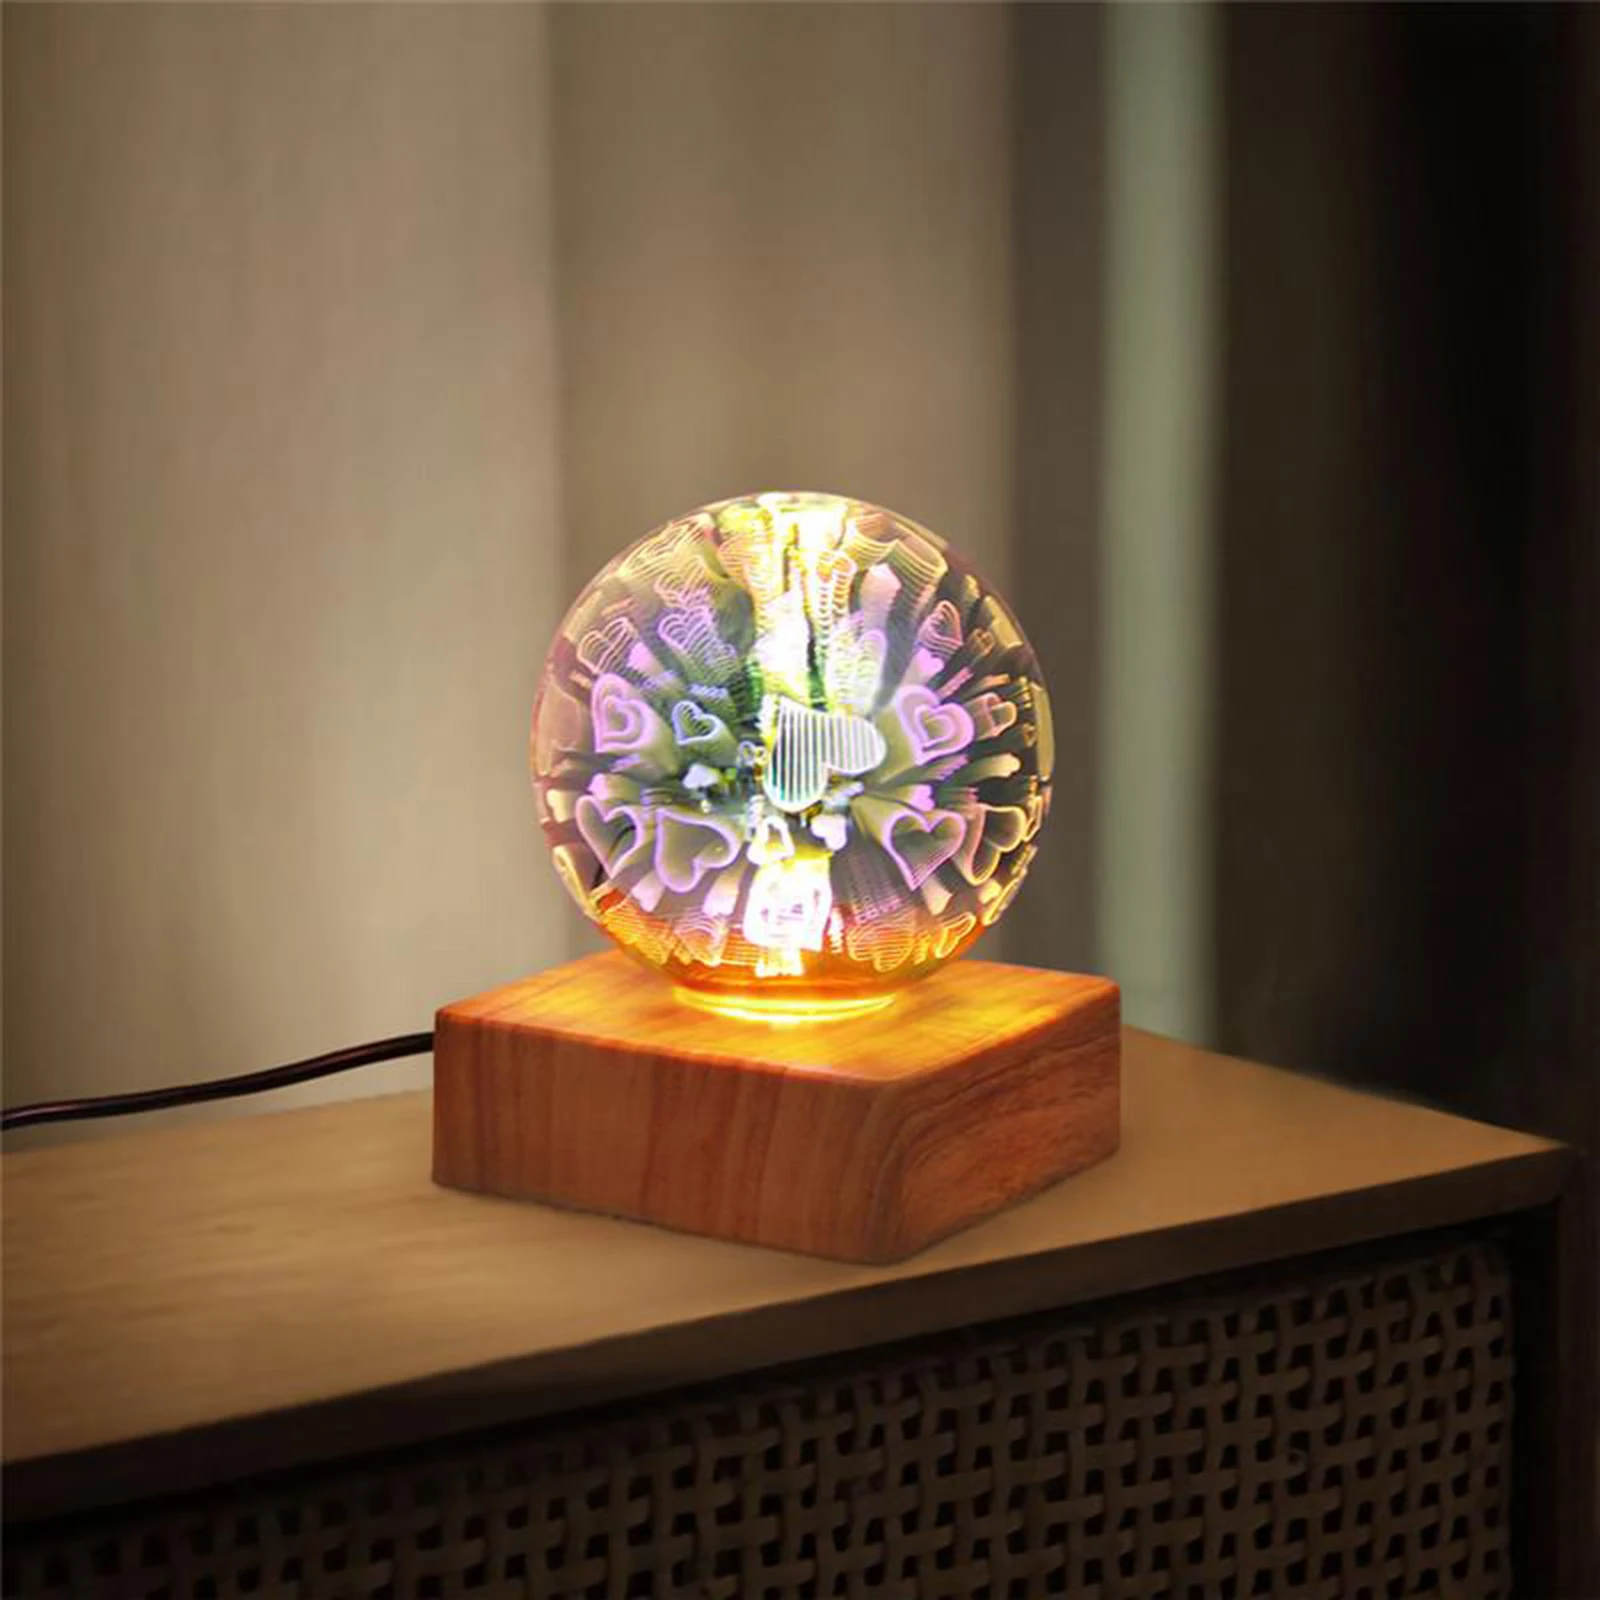 USB Powered LED 3D Fireworks Glass Ball Night Light for Holiday Christmas Party Decor